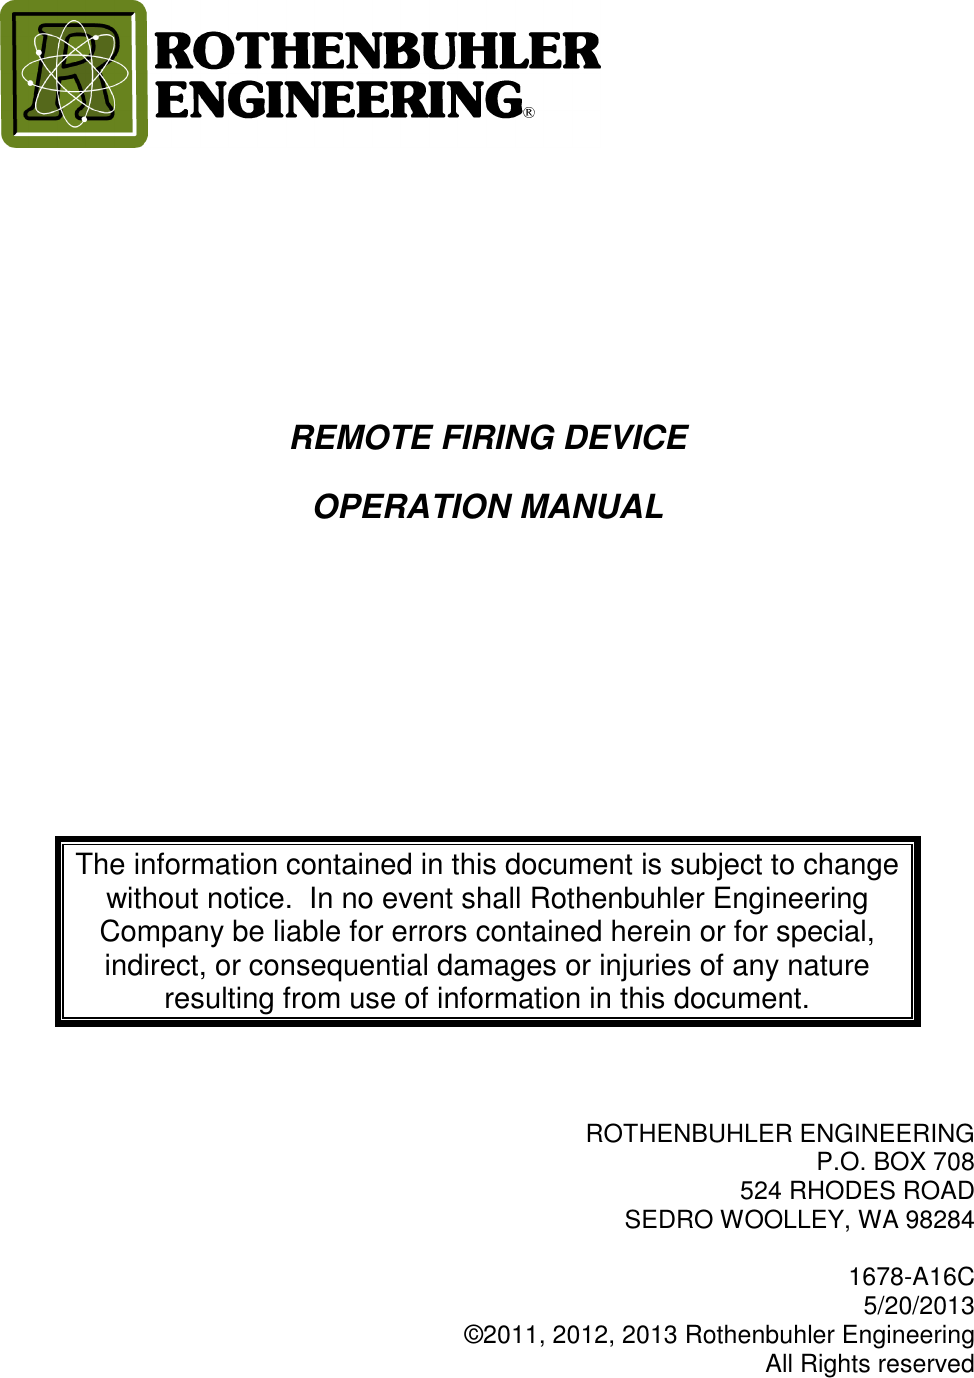       REMOTE FIRING DEVICE OPERATION MANUAL     The information contained in this document is subject to change without notice.  In no event shall Rothenbuhler Engineering Company be liable for errors contained herein or for special, indirect, or consequential damages or injuries of any nature resulting from use of information in this document.    ROTHENBUHLER ENGINEERING P.O. BOX 708 524 RHODES ROAD SEDRO WOOLLEY, WA 98284  1678-A16C  5/20/2013 ©2011, 2012, 2013 Rothenbuhler Engineering All Rights reserved 